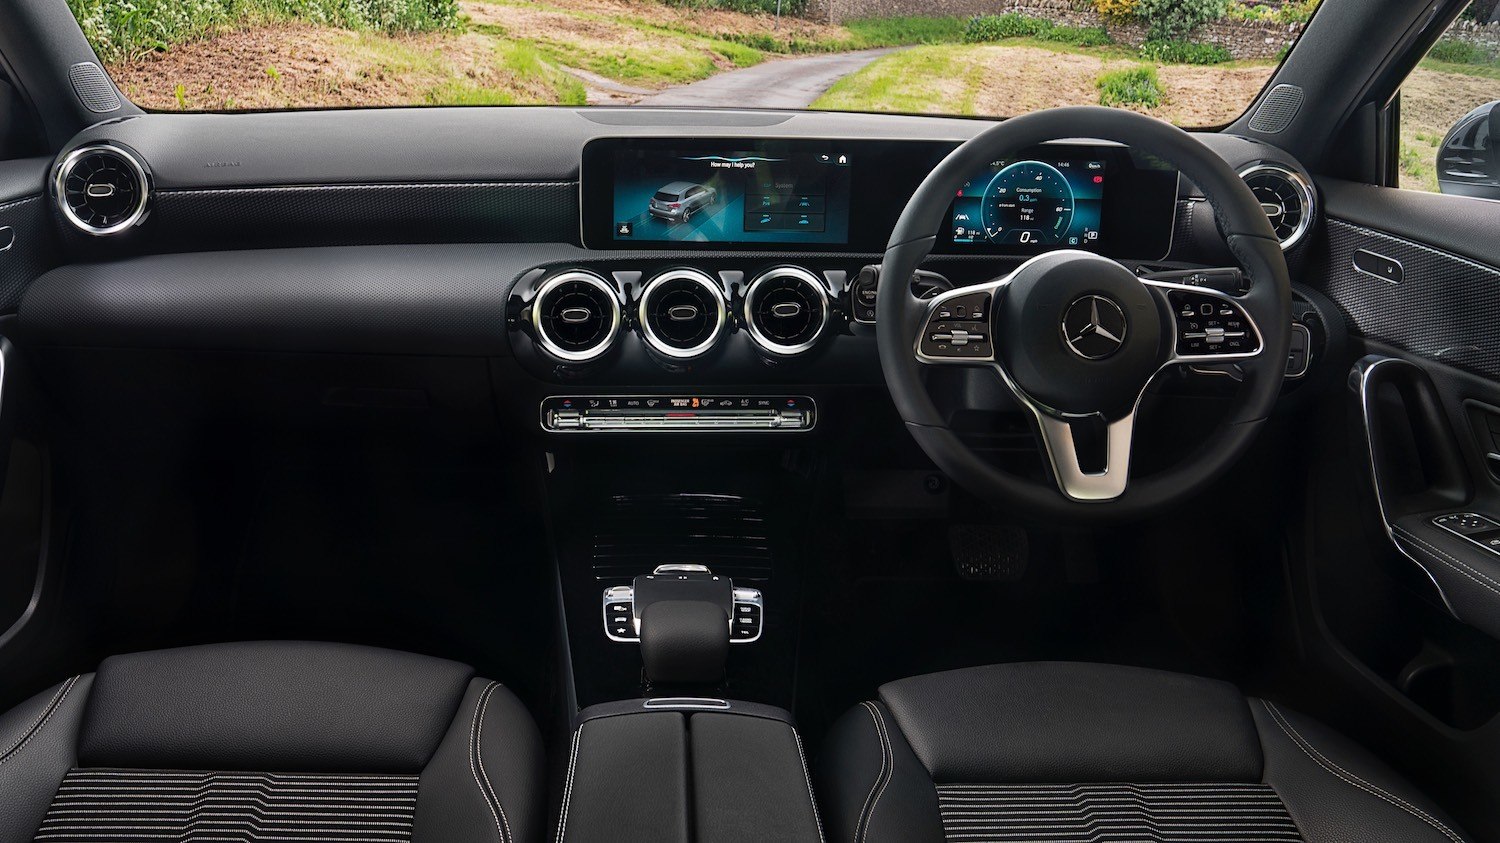 Tim Barnes-Clay reviews the New Mercedes-Benz A-Class 35